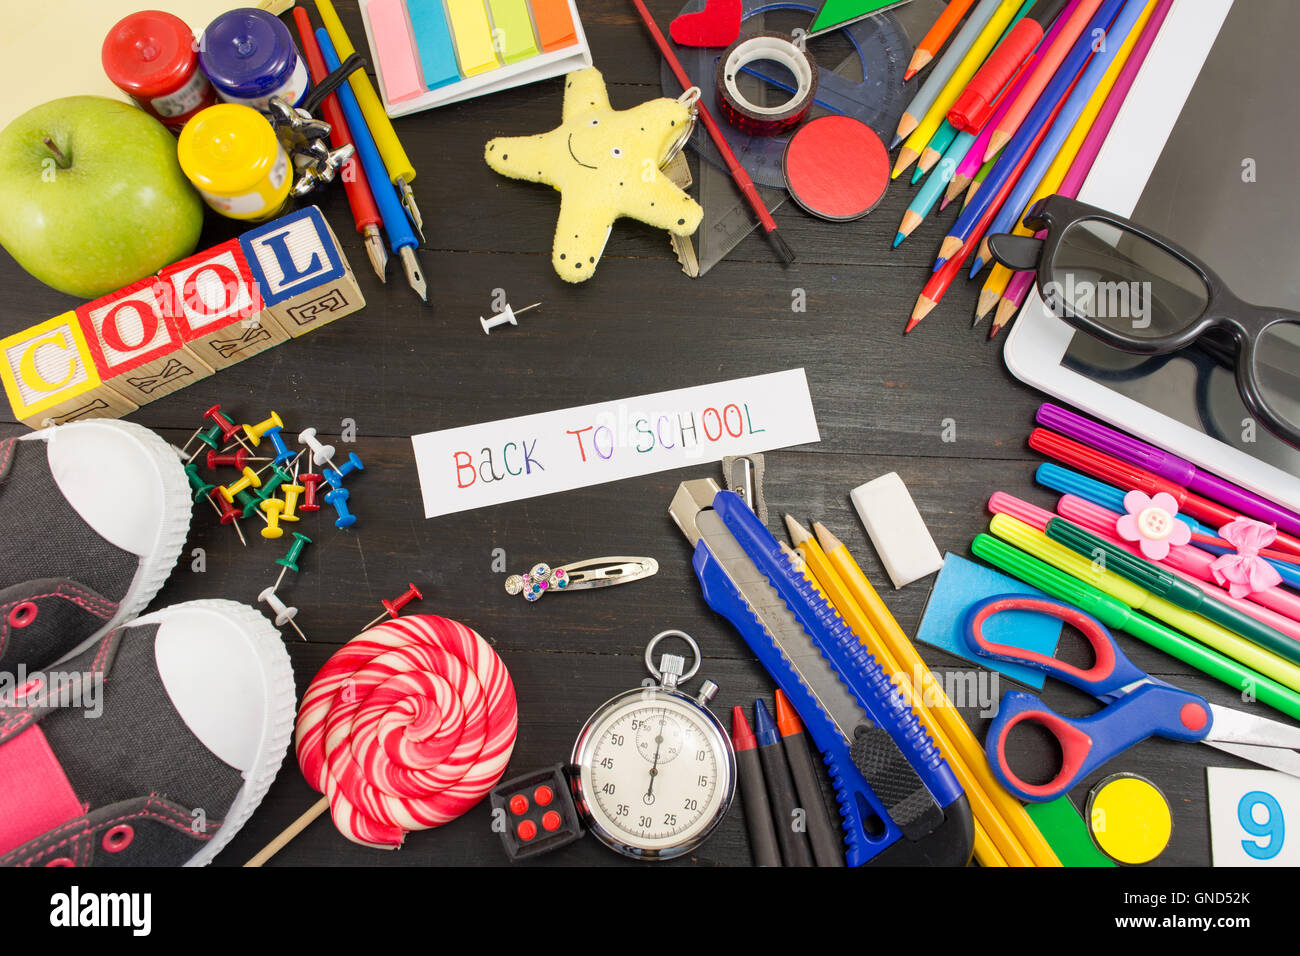 Creative learning objects on a wooden table Stock Photo